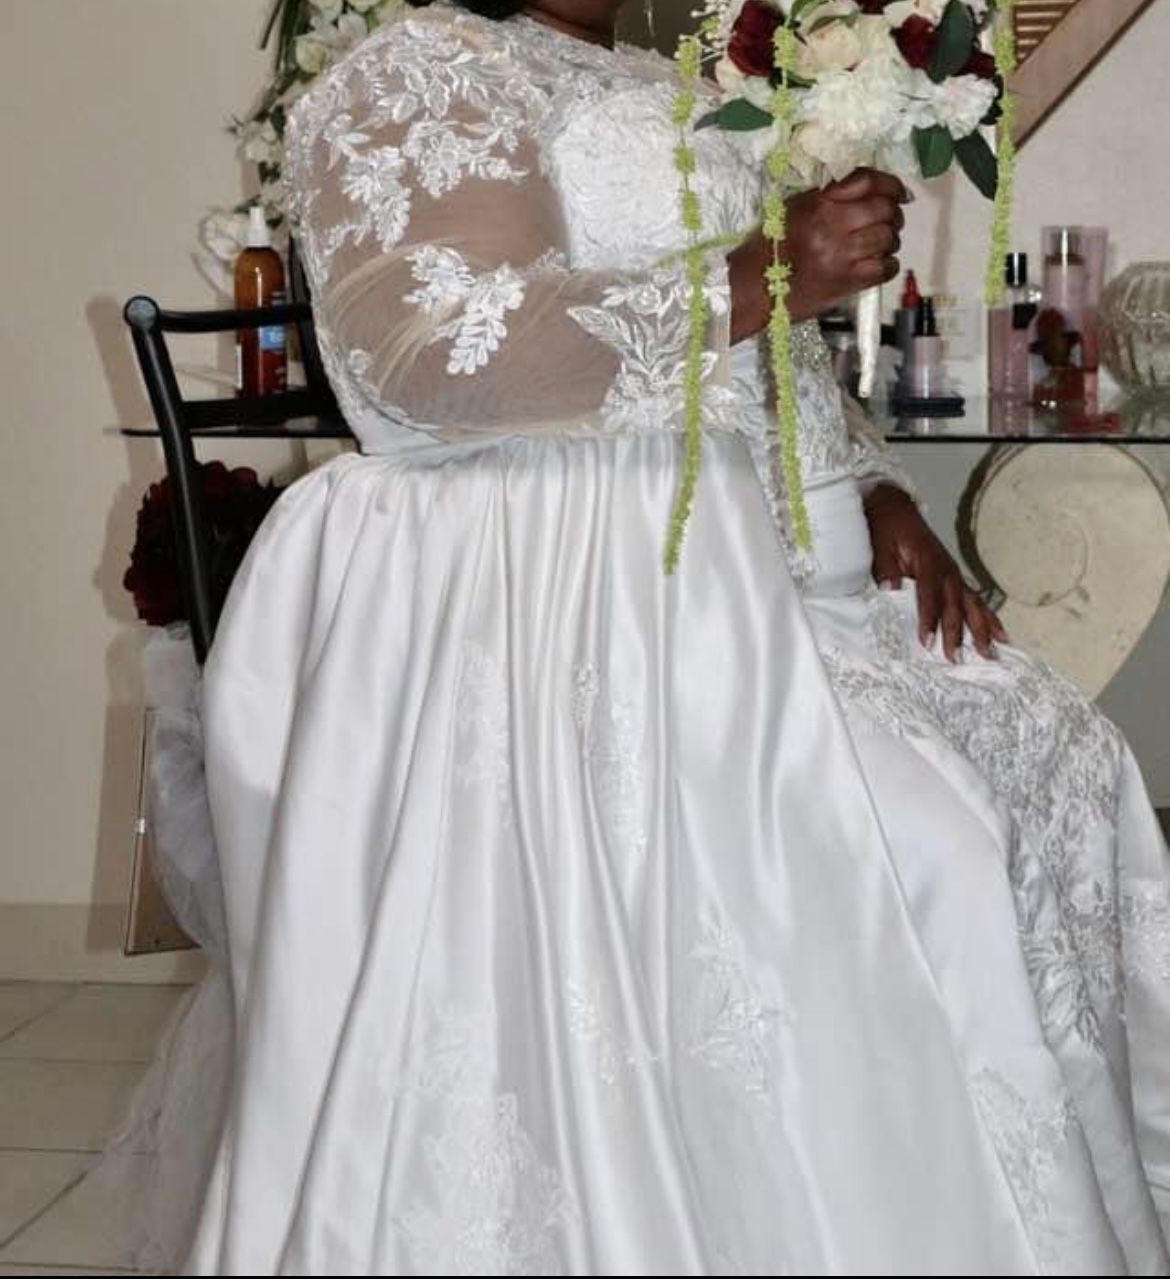 Affordable Wedding Dress (Serious Inquires)